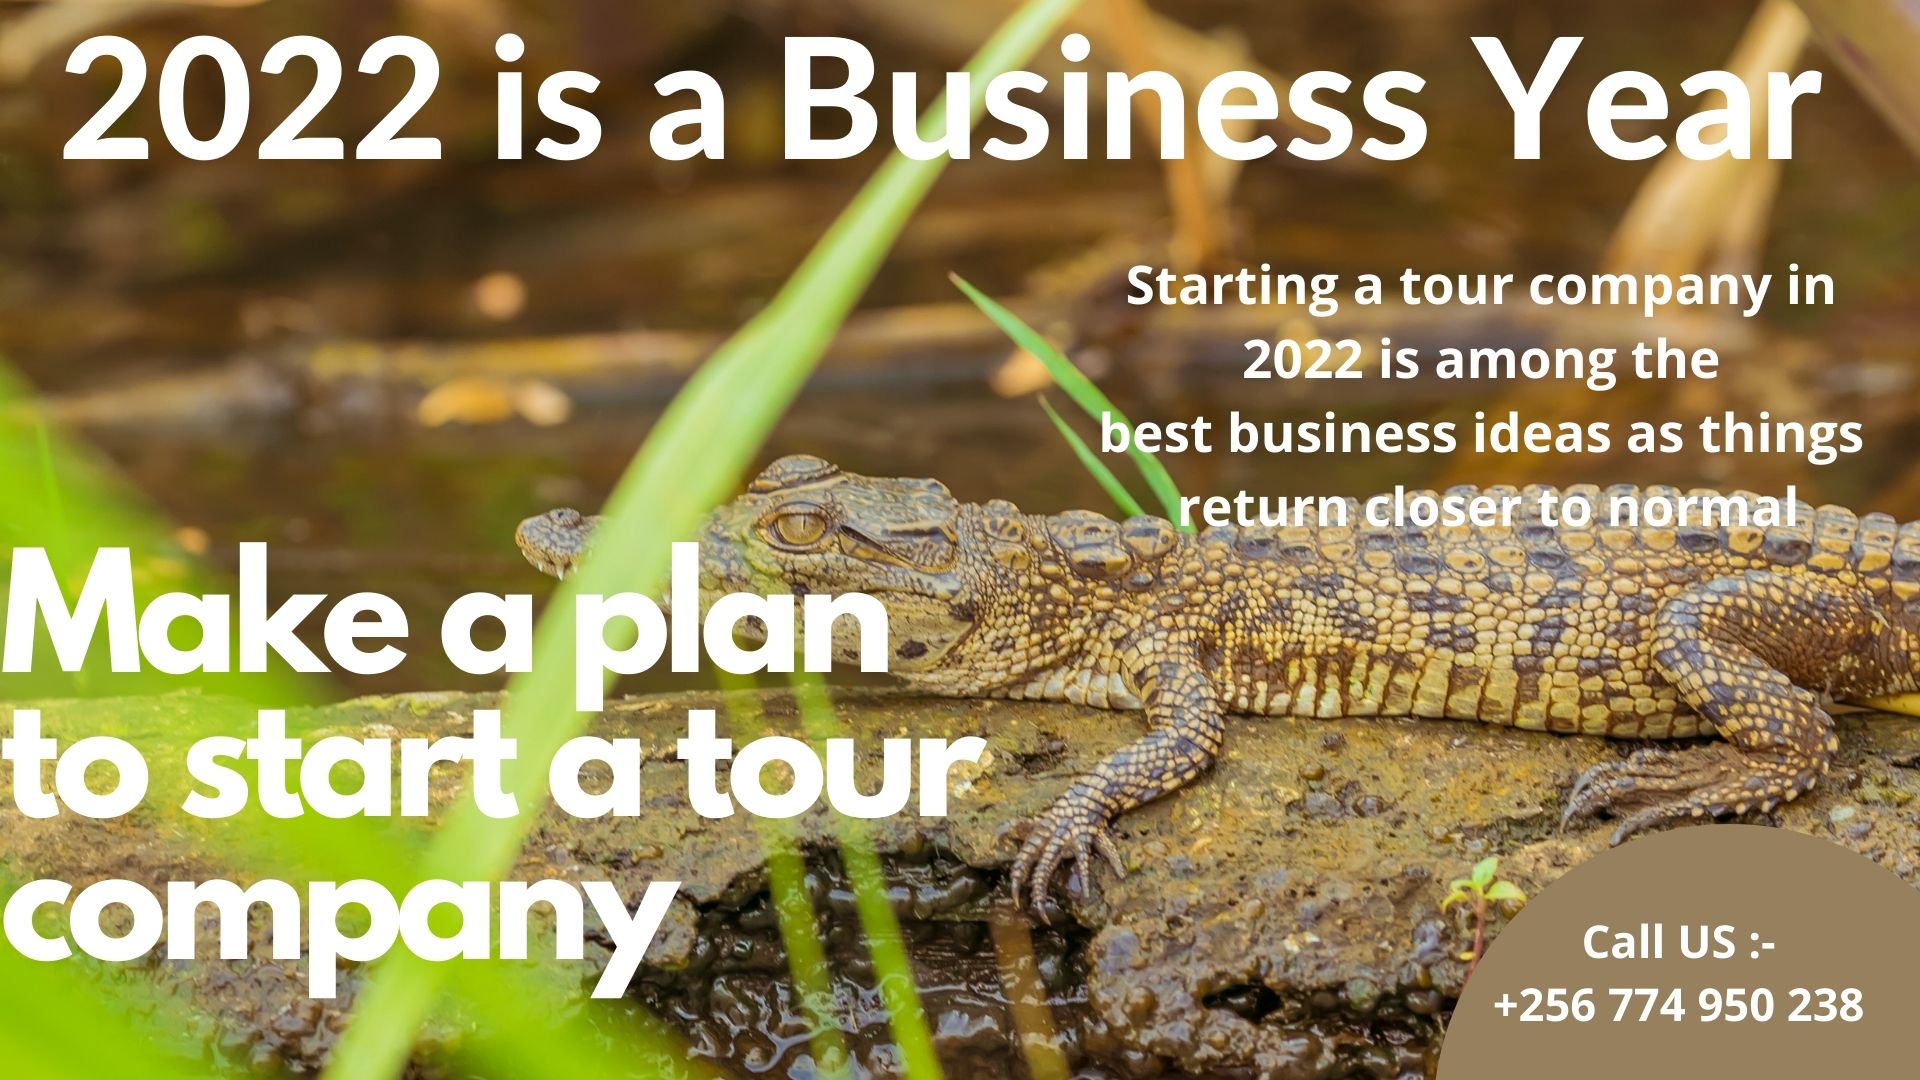 Beginner’s Guide To Starting A Tour Company In 2022